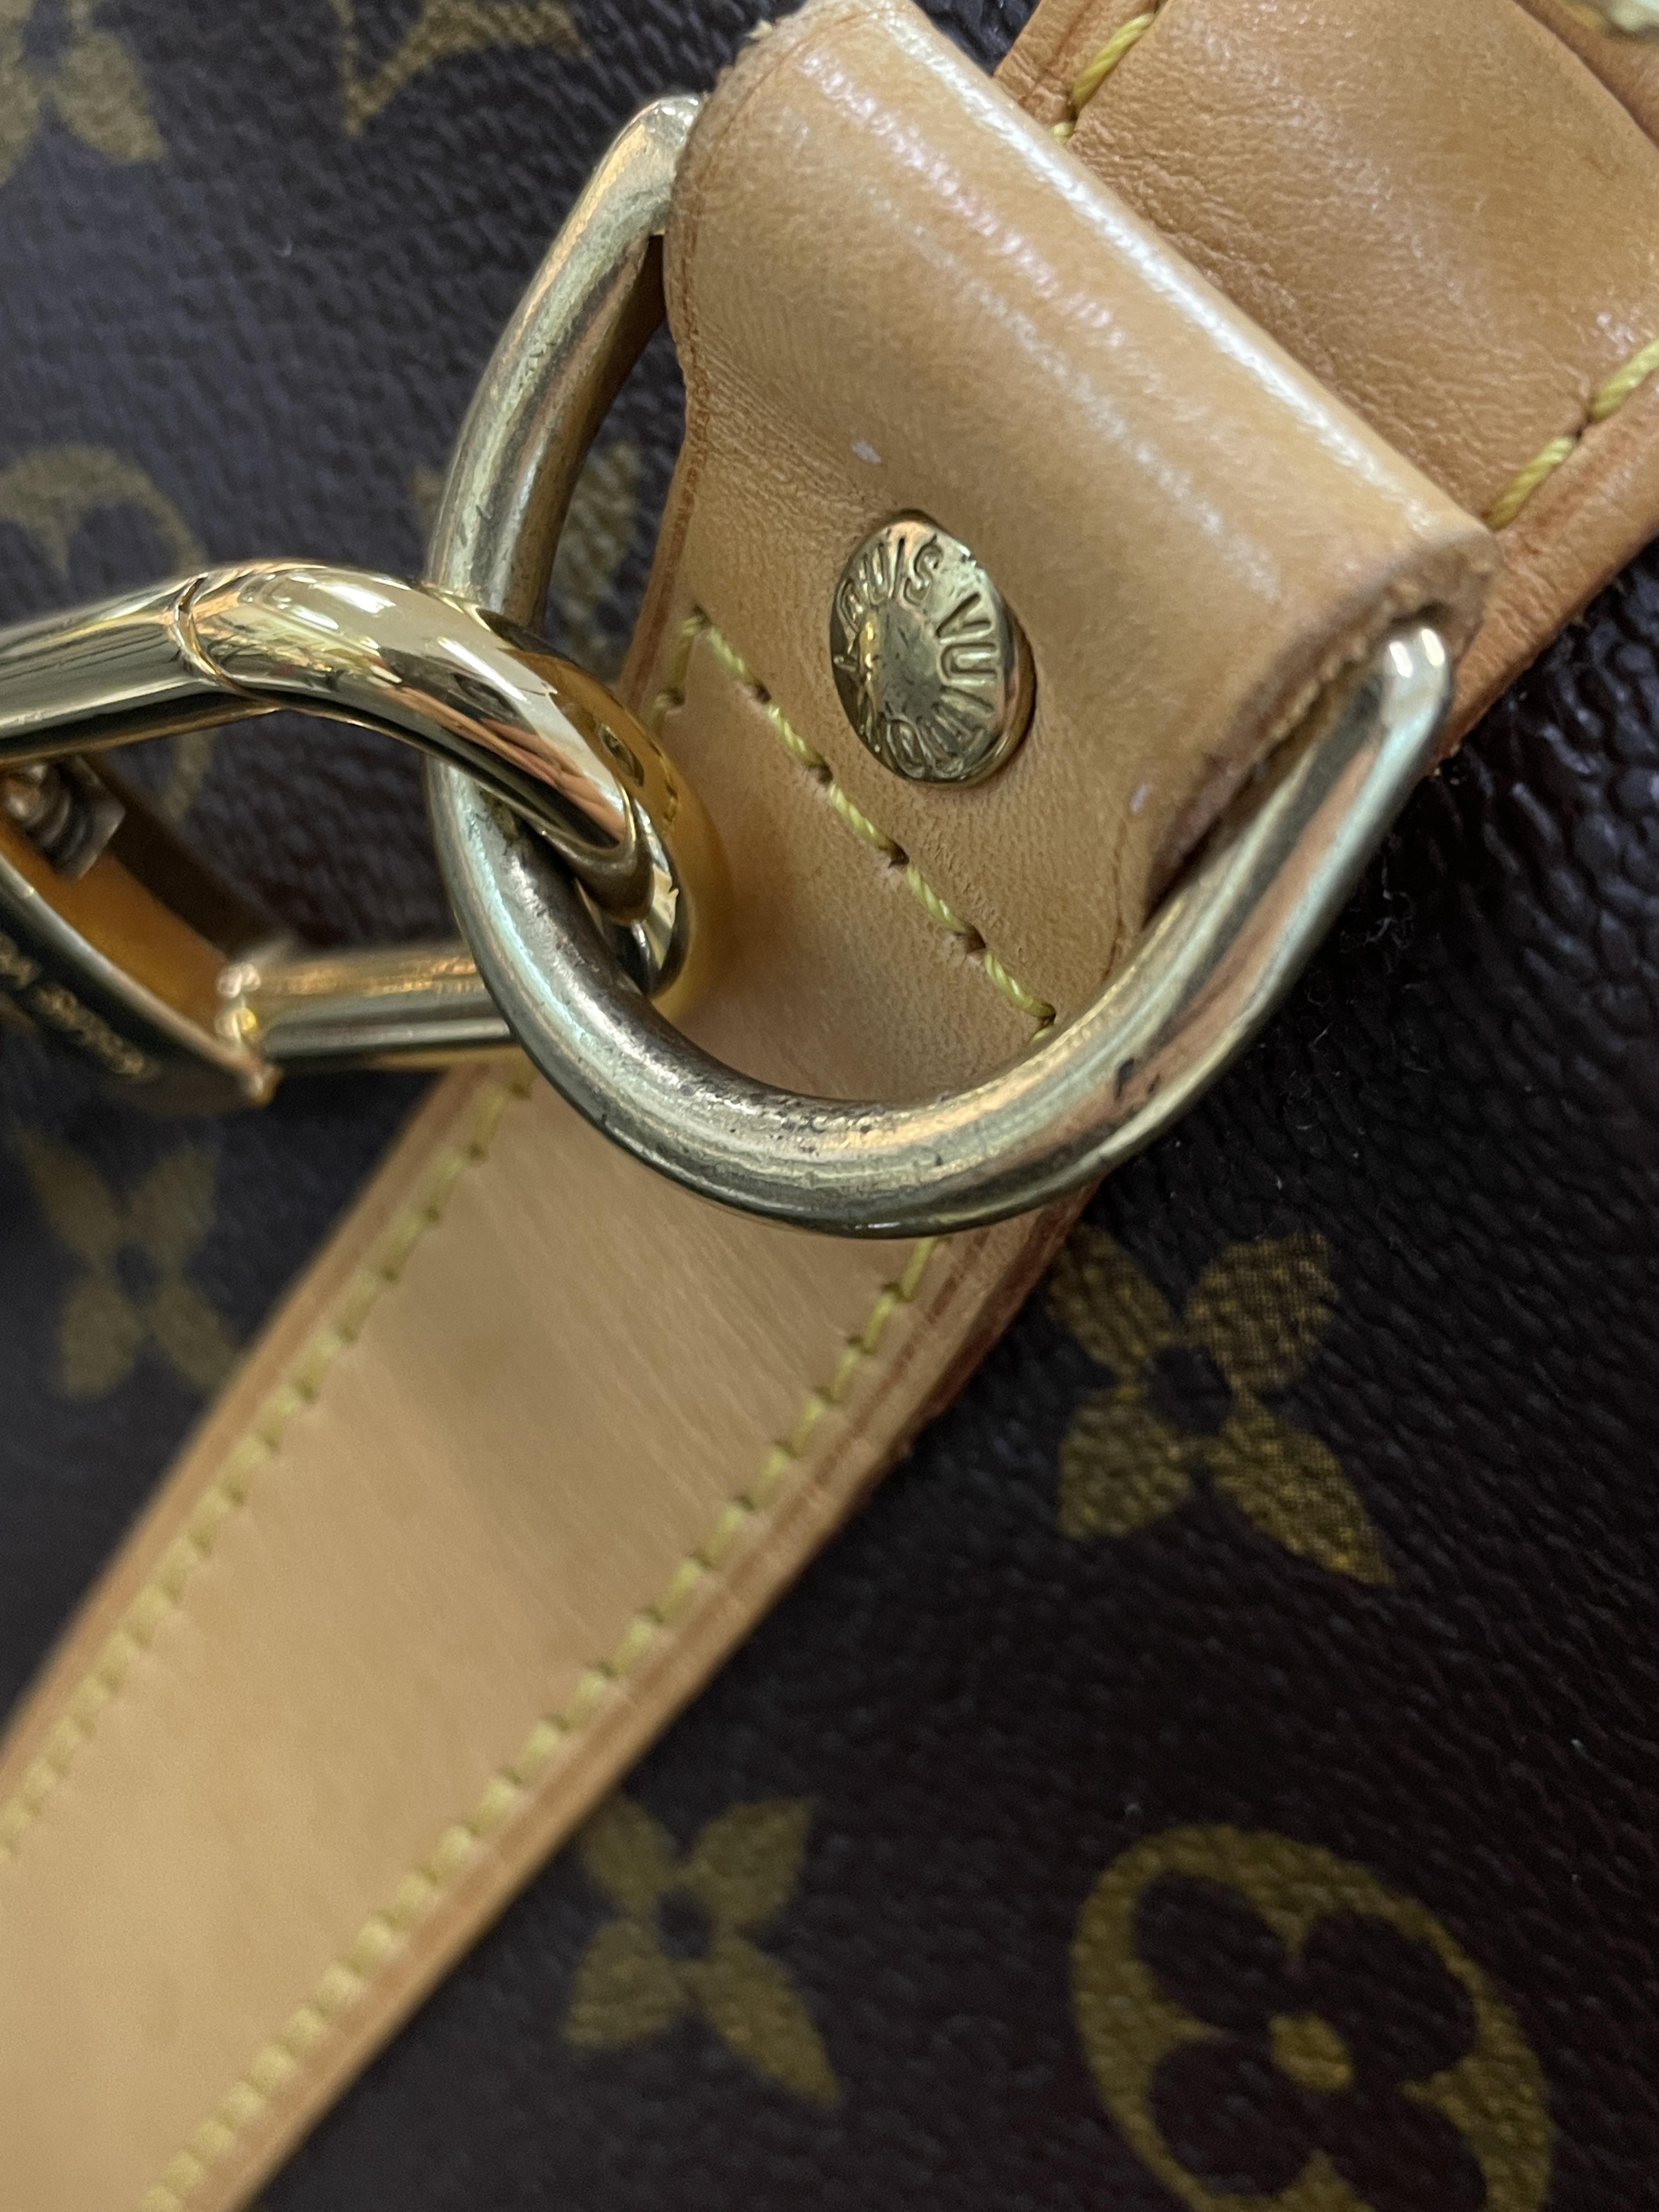 LOUIS VUITTON KEEPALL BANDOULIERE - Image 7 of 10